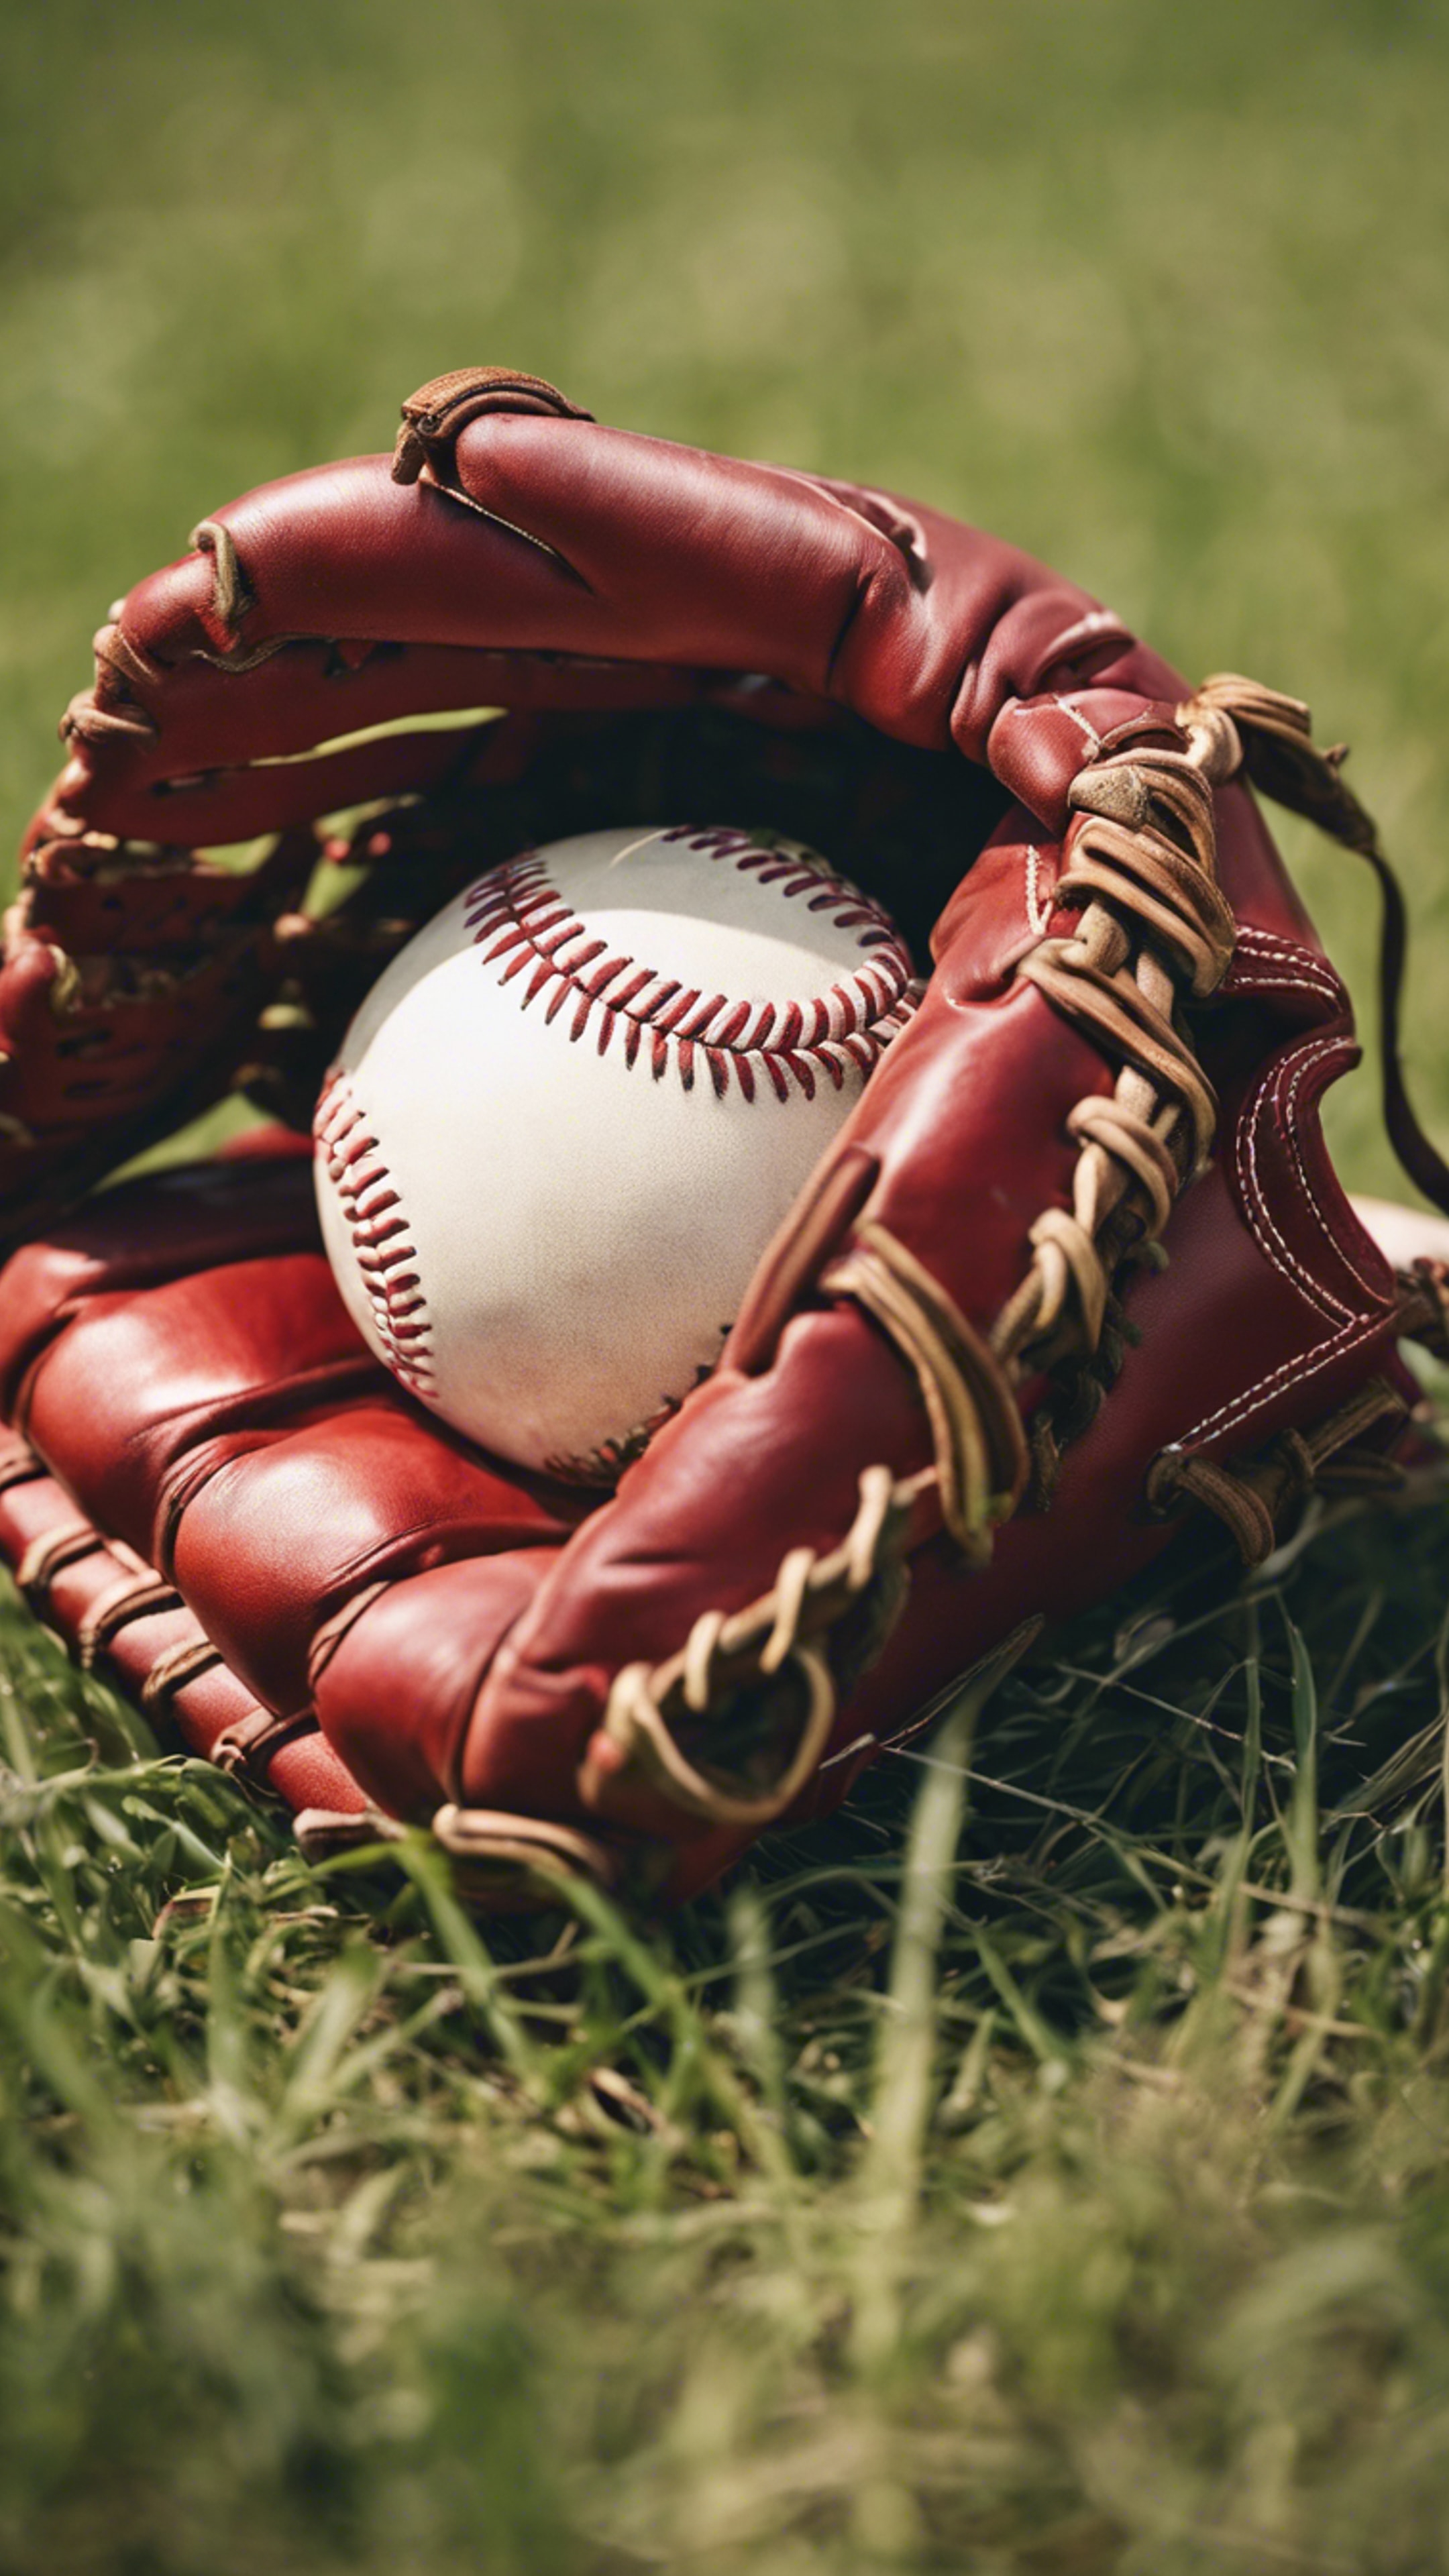 A striking red leather baseball glove on a grassy field right after a game. Wallpaper[10102f7c198241d6b5bd]